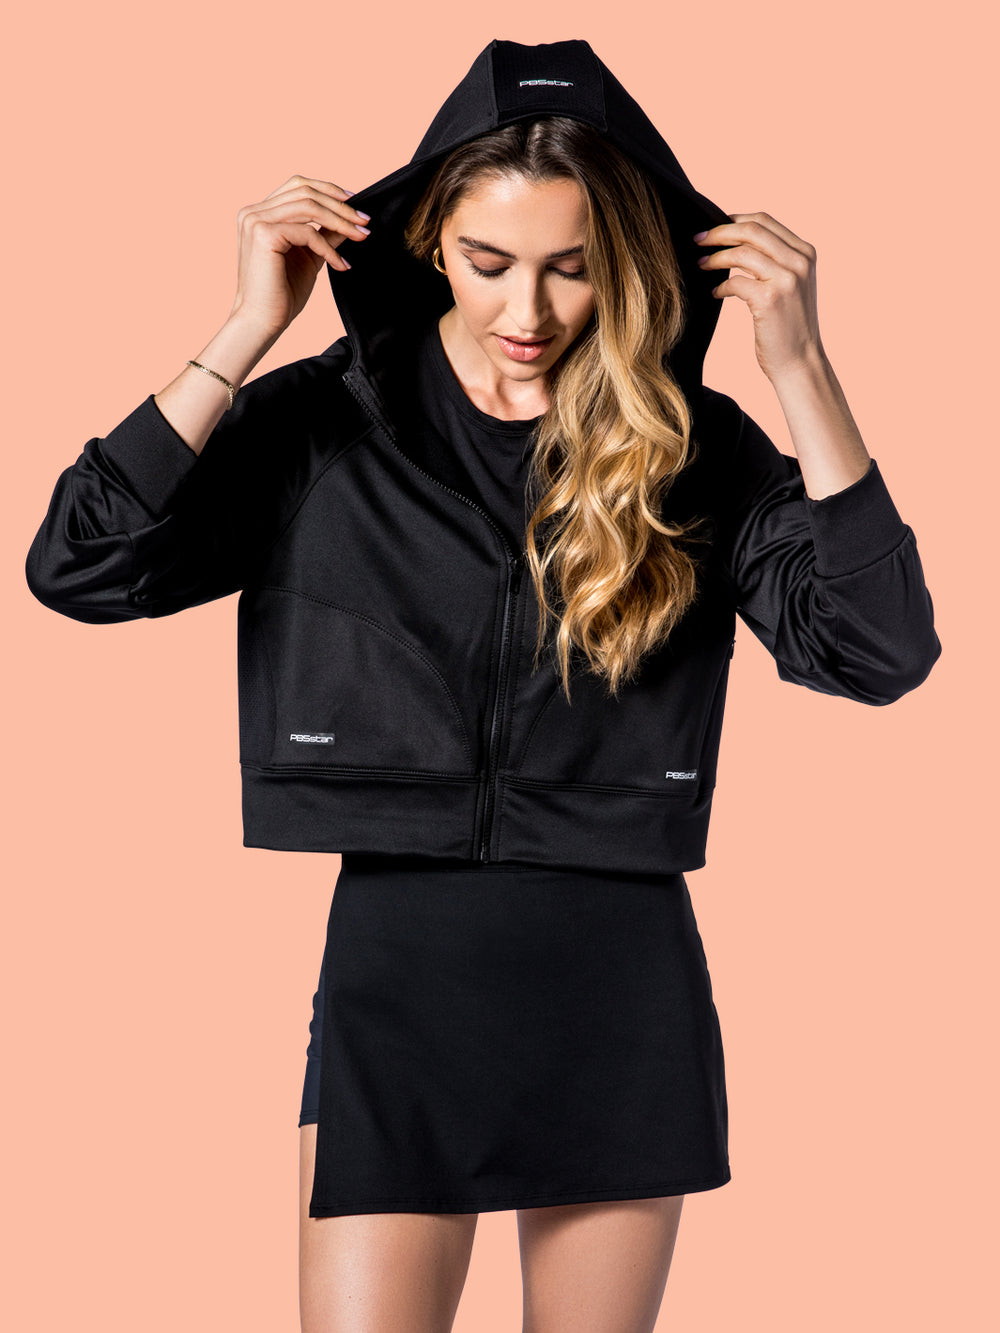 Model adjusts the hood of PB5Star's black Cropped Performance Hoodie, pairing it with a black Side Split Skirt for a sporty-chic look.